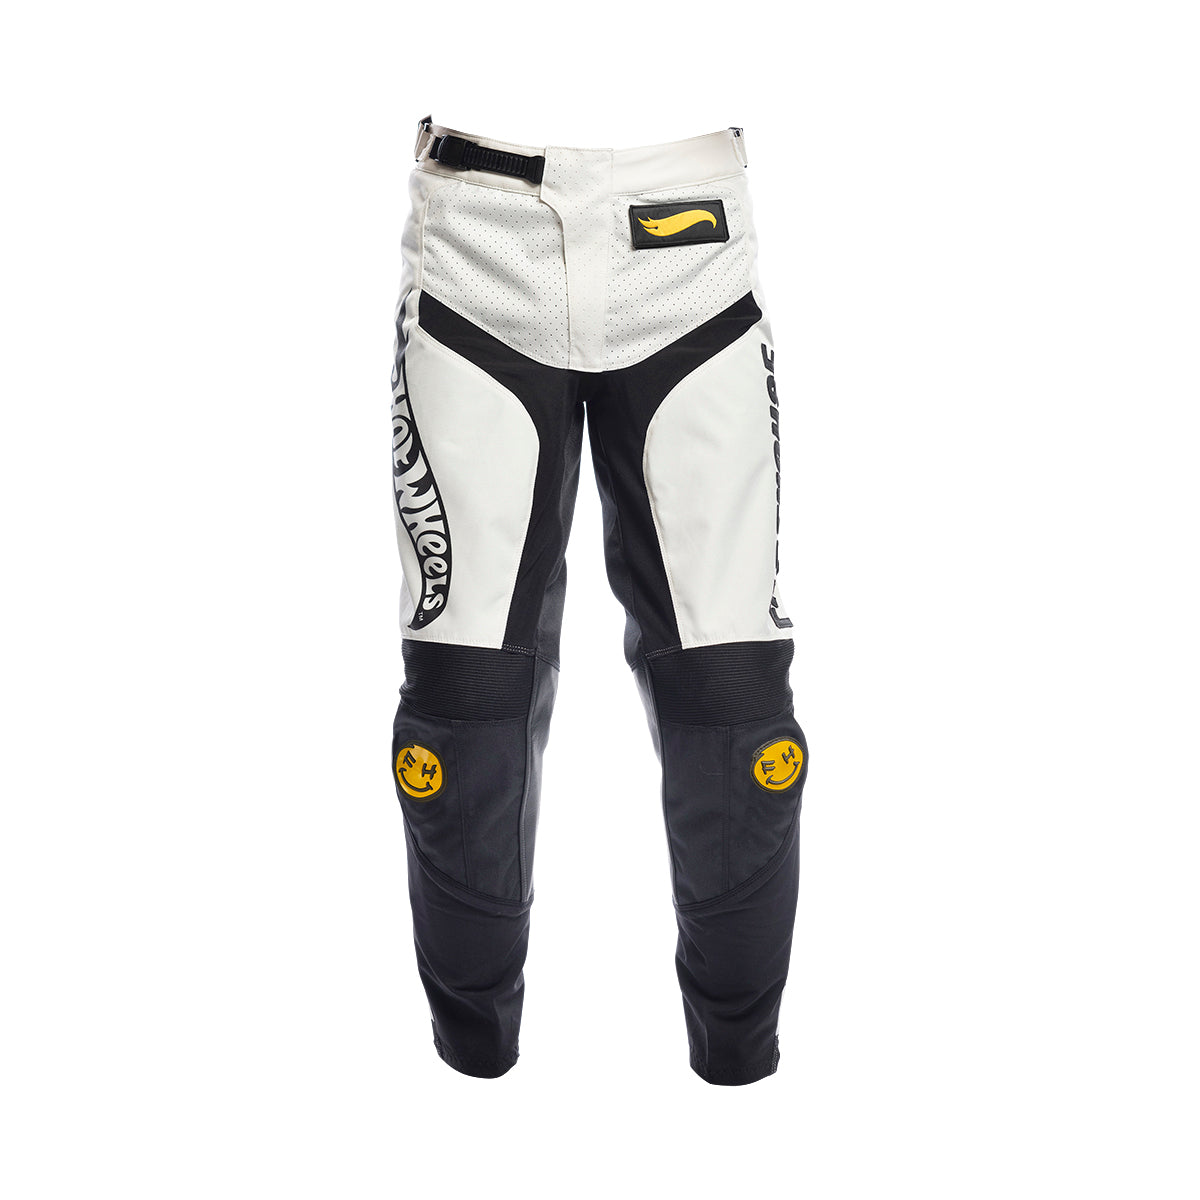 Grindhouse Hot Wheels Youth Pant - White/Black